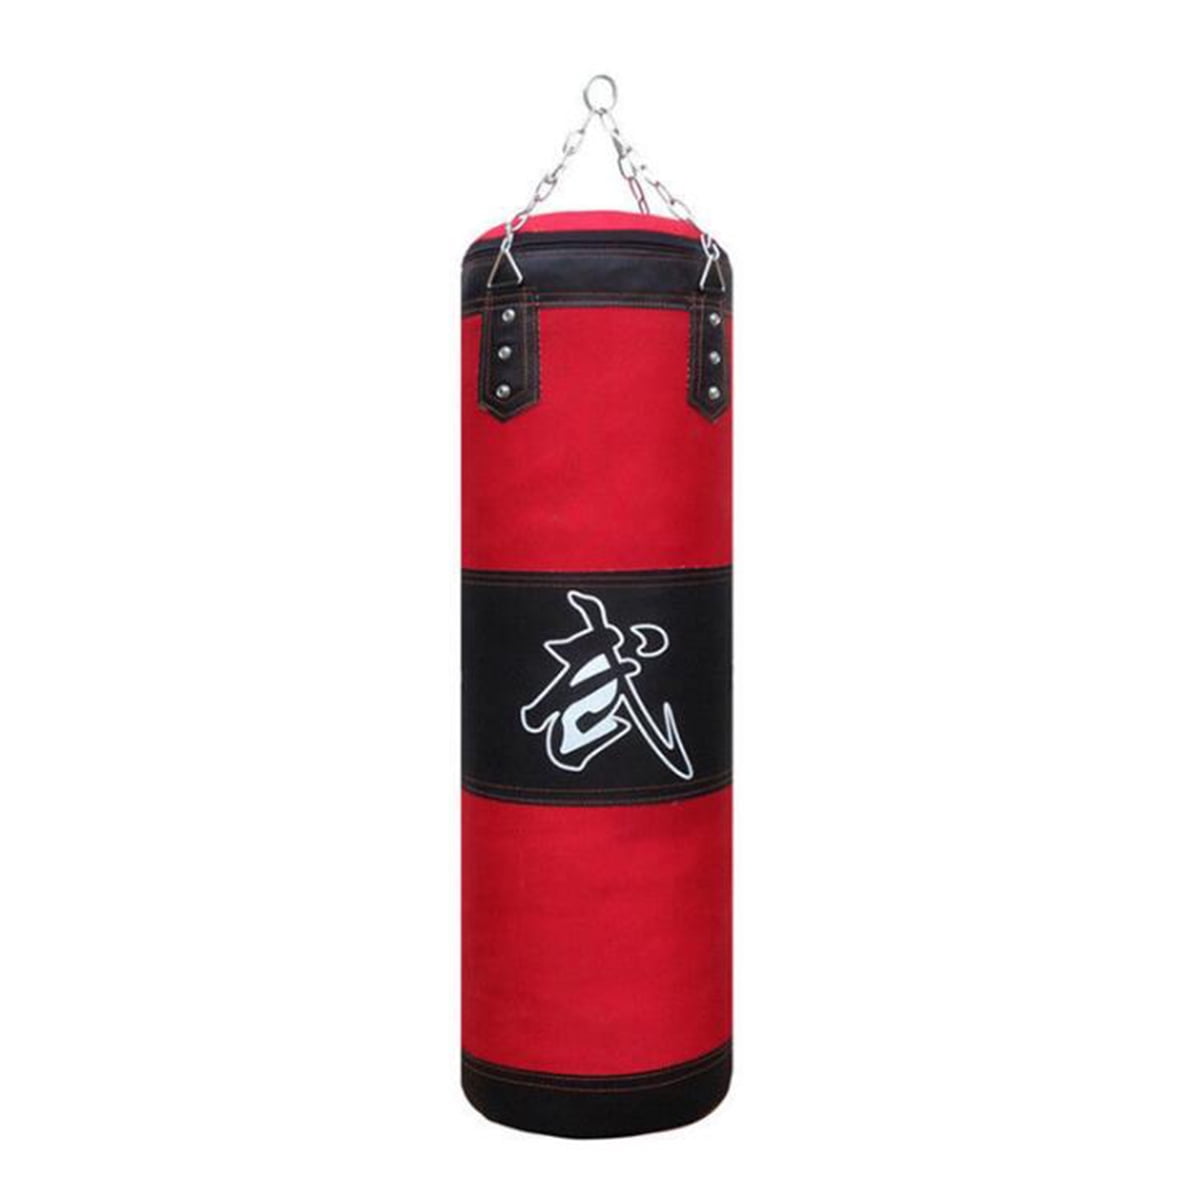 4ft Workout MMA 200 Pound Boxing Bag for Kickboxing… Non Tear Leather Boxing Equipment Heavy Boxing Bag for Adults & Youth Adjustable Wall Bracket Ceiling Hook Chain 